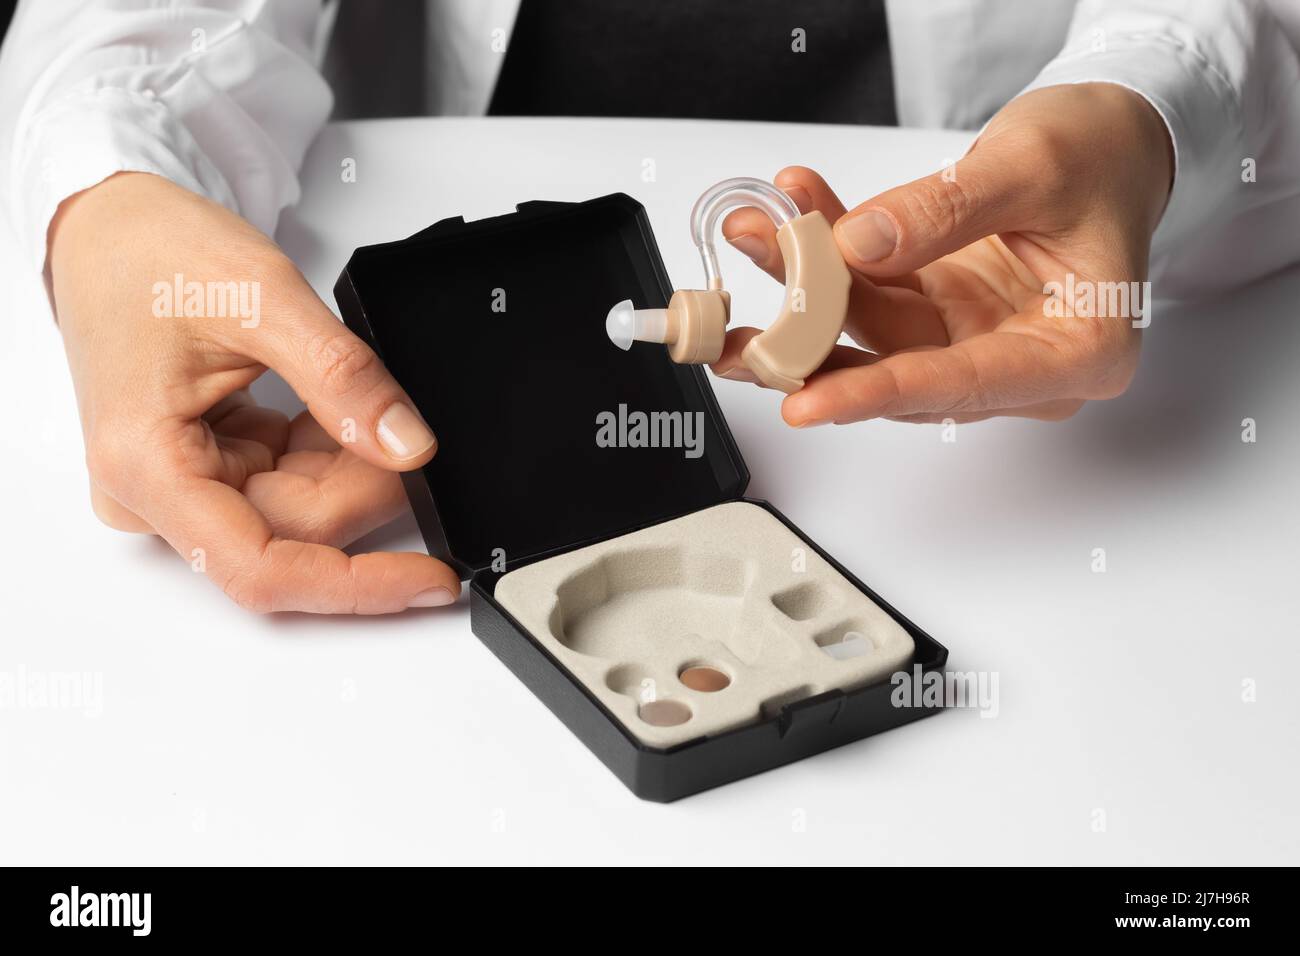 Hearing aid in a box in the hands of a doctor. Stock Photo